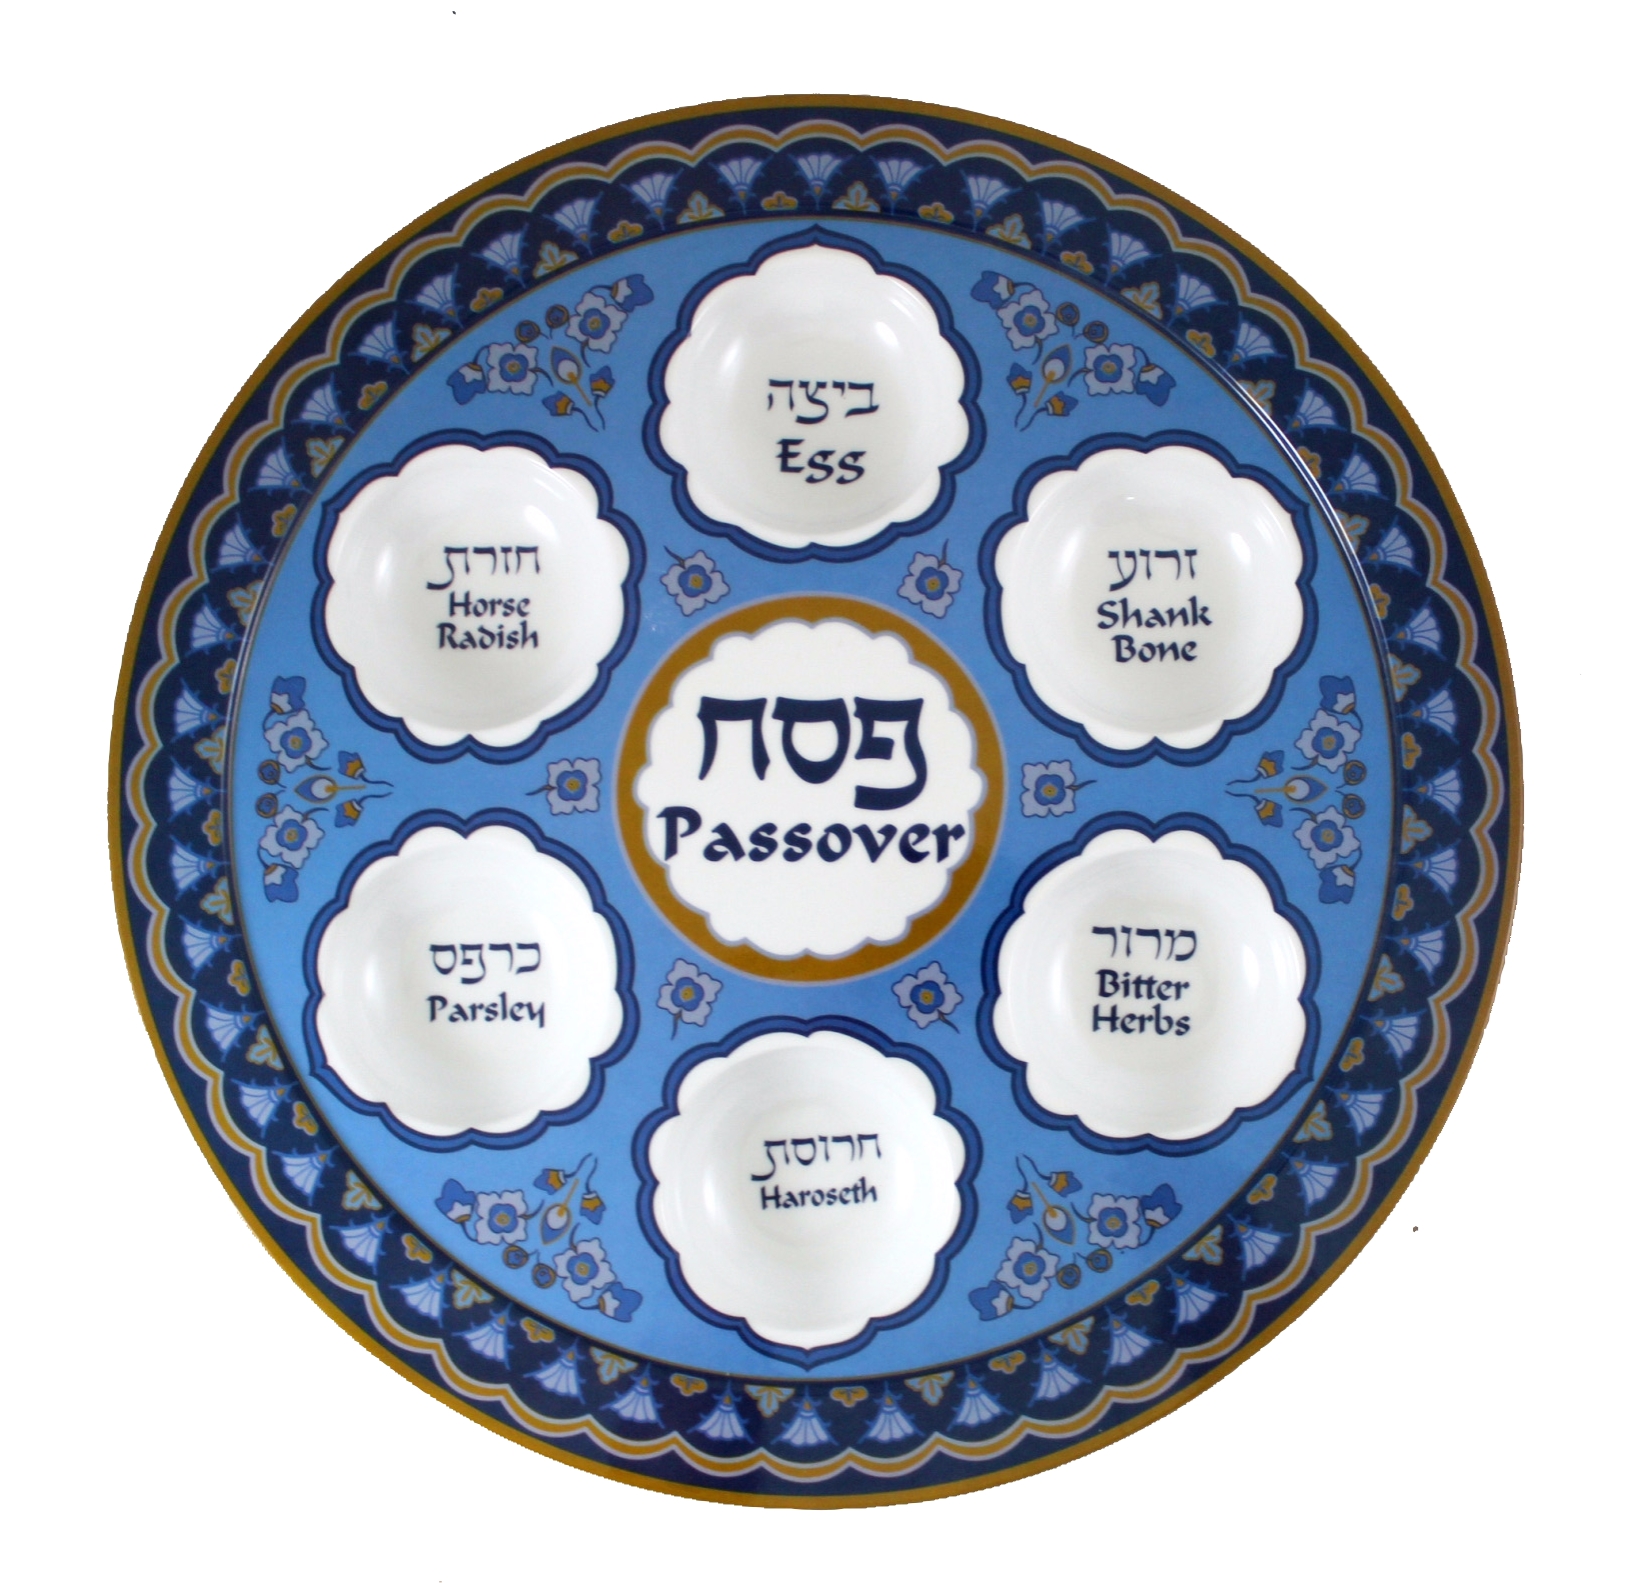 Passover Seder Plate Clipart Seder Plate Symbols   Viewing